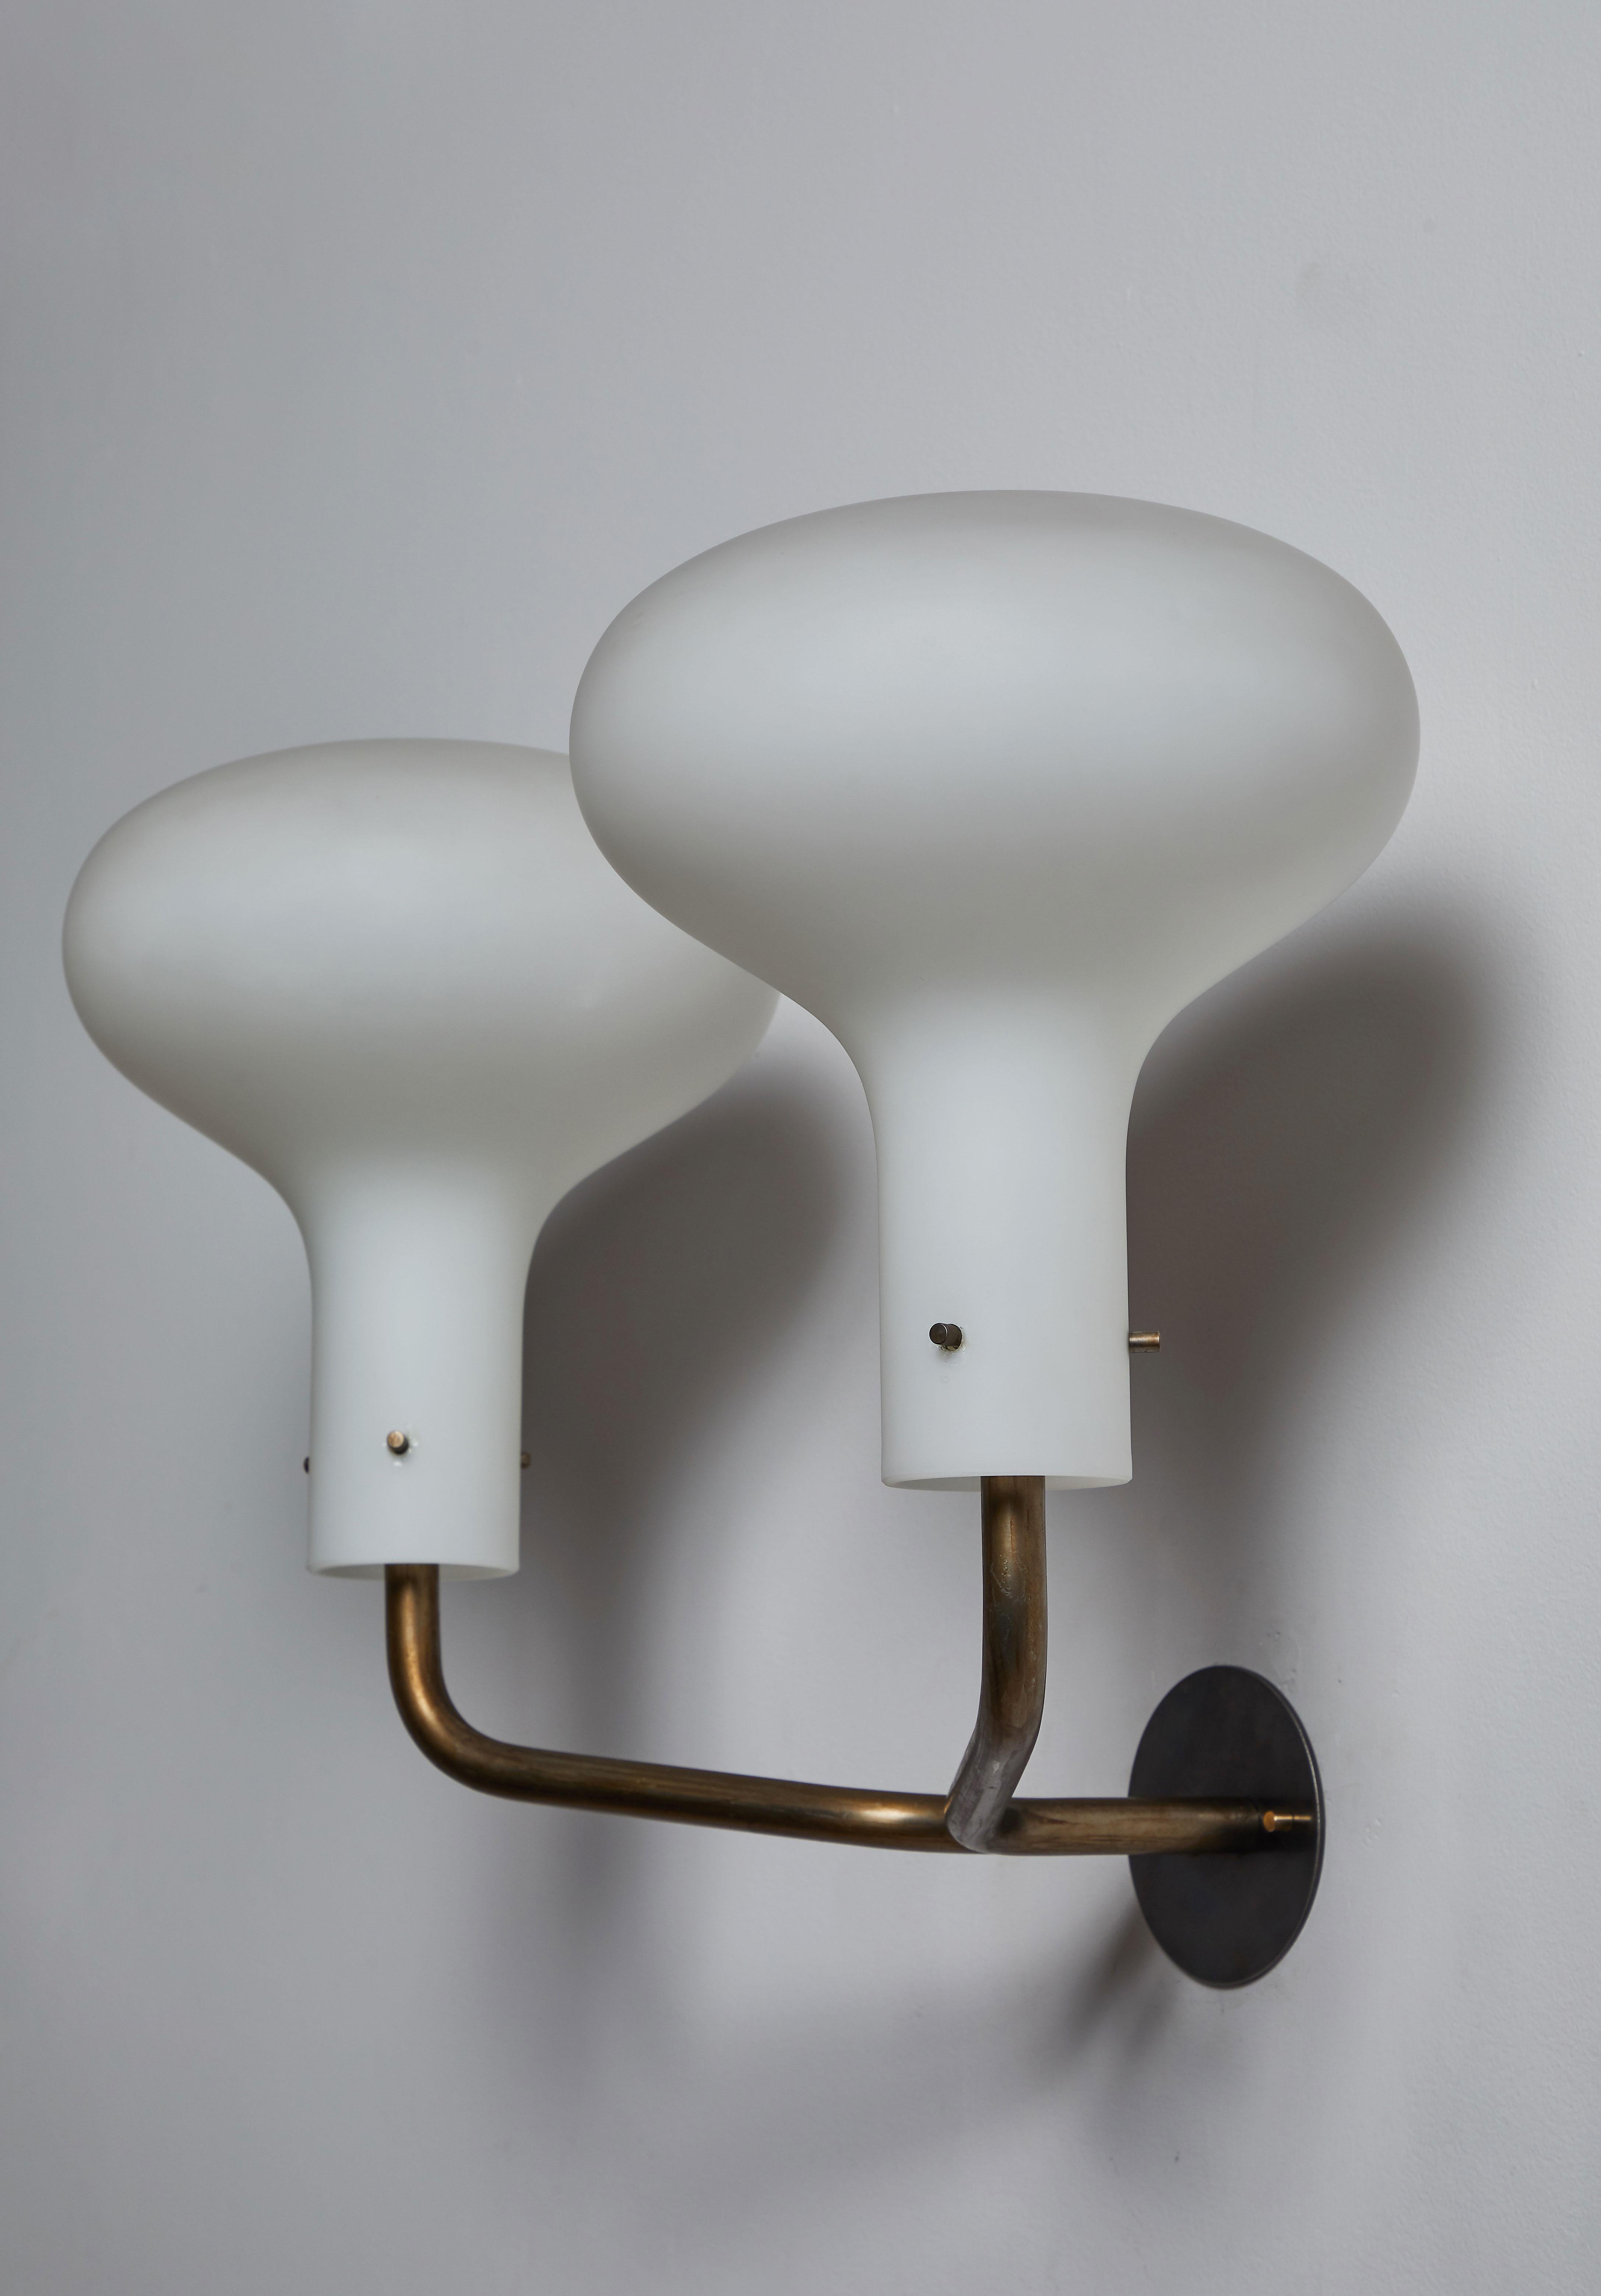 Pair of double-arm model Lp12 galleria sconces by Ignazio Gardella for Azucena. Designed and manufactured in Italy, 1958. Brass and brushed satin glass diffusers. Rewired for US junction boxes. Each light takes one E27 75w maximum bulb.